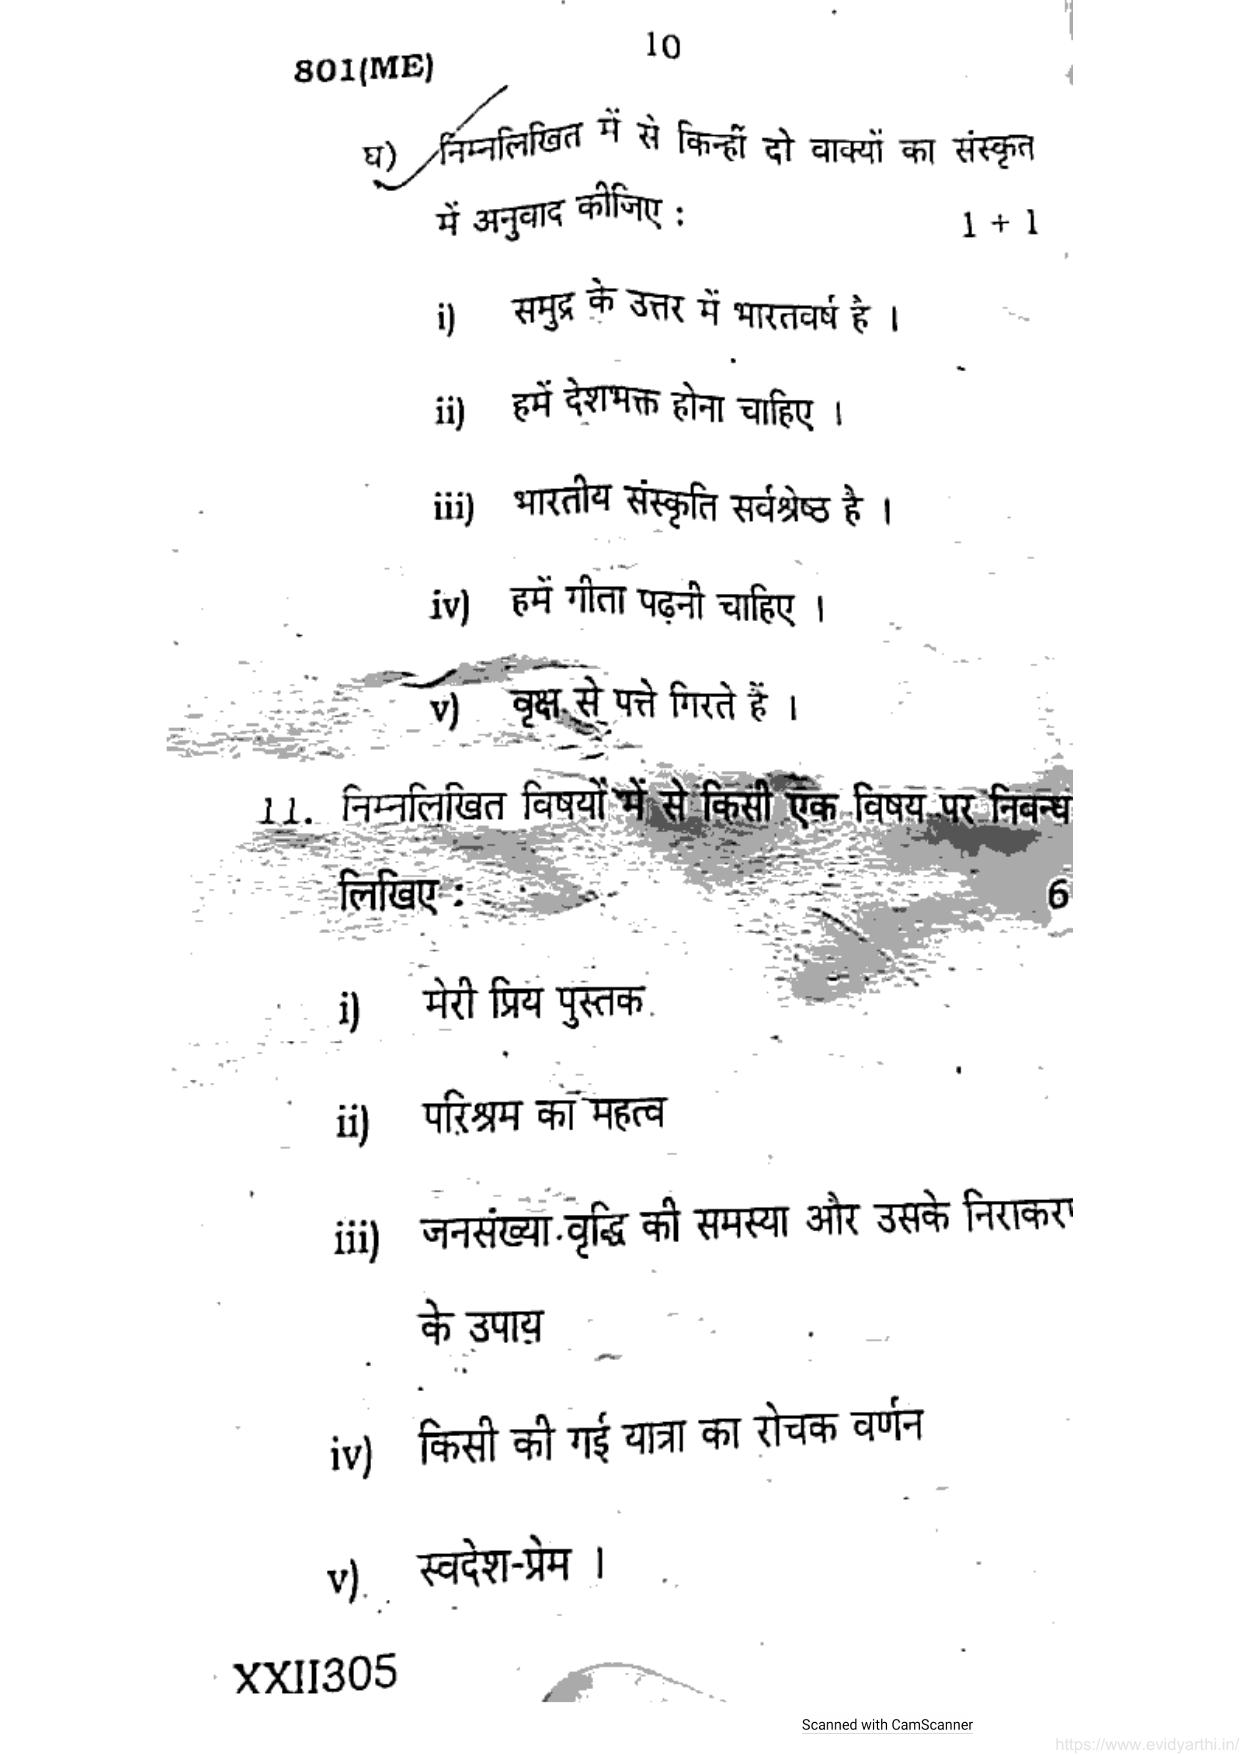 UP Board Previous Year Question Paper Class 10 Hindi (801 ME) – 2020 - Page 10